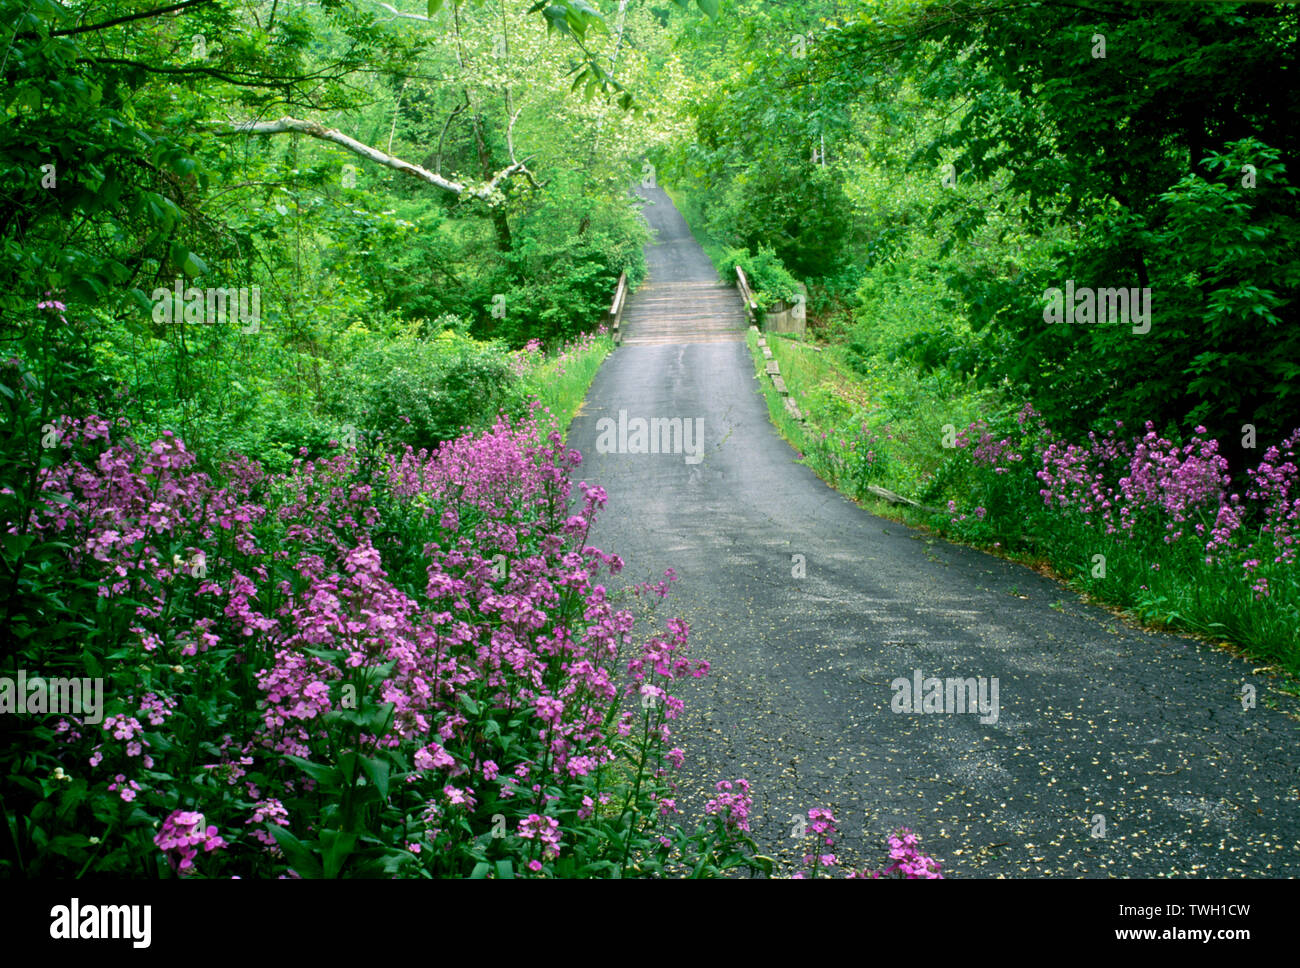 Country road in spring curves though tree lined forest with blooming purples flowers, Dames Rocket, Hesperus matronalis, across a bridge Missouri, USA Stock Photo